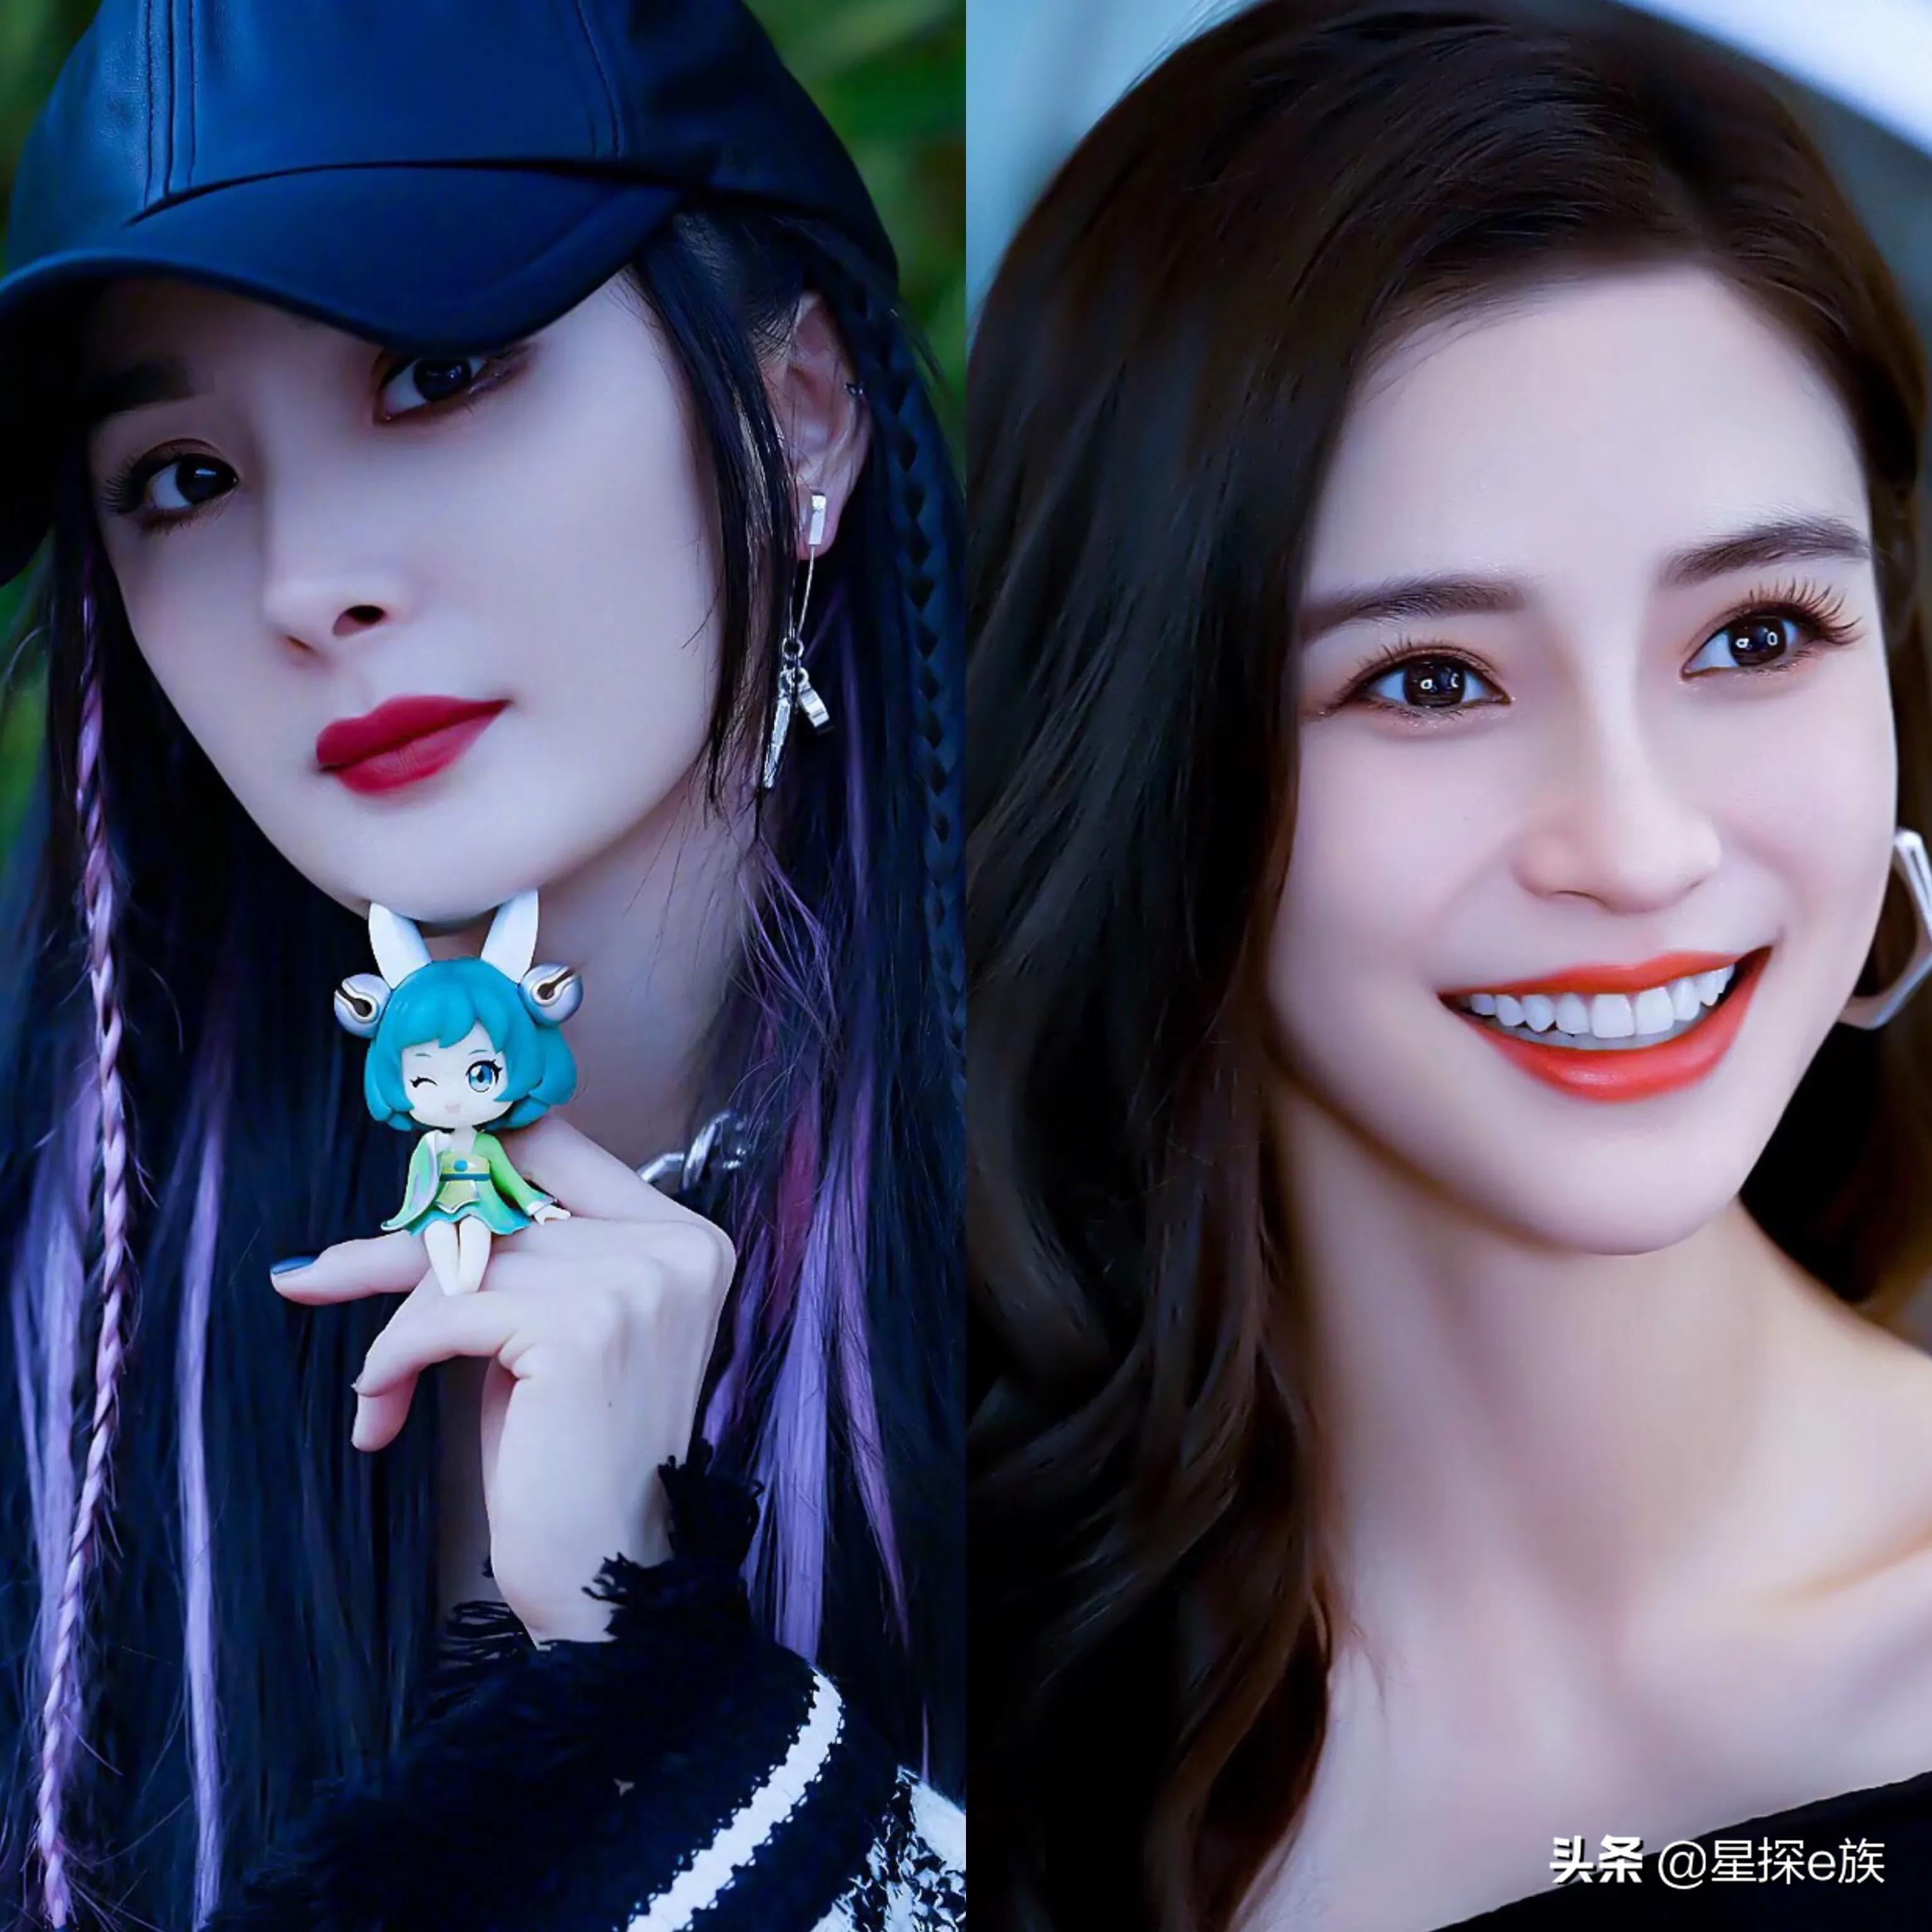 X 上的Bulgari：「Chinese actress and singer Ms.#YangMi spotted